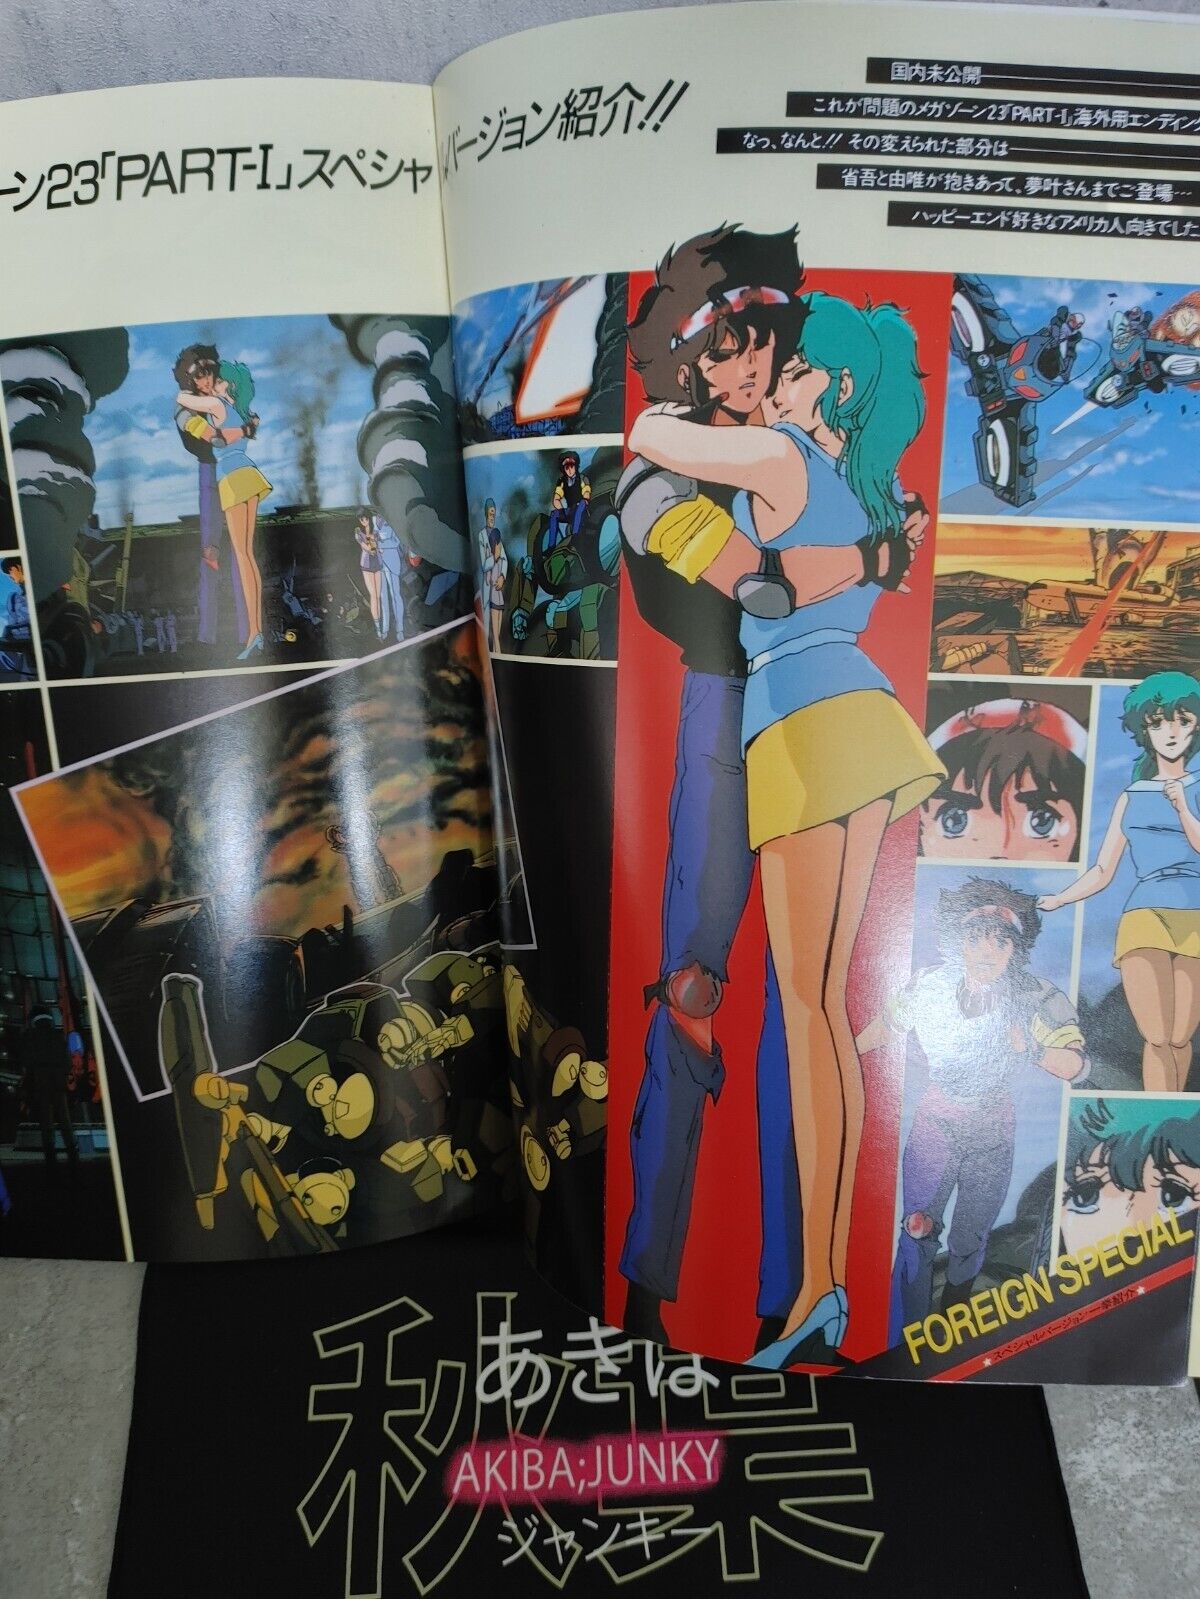 Megazone 23 booklet Part II  Retro Film Animation Japan limited release